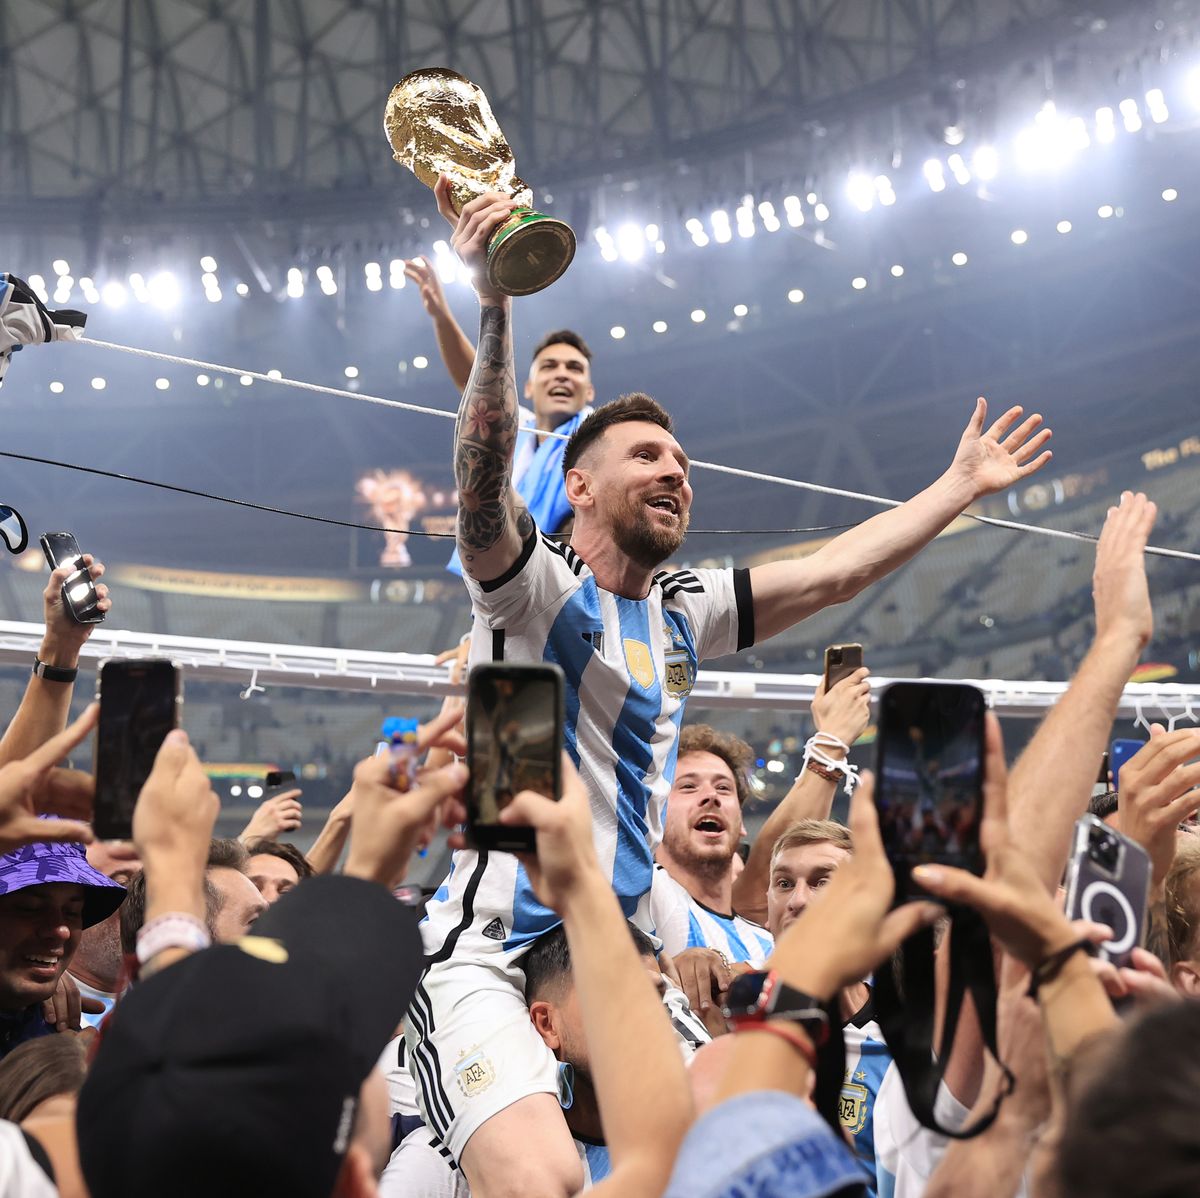 Argentina Messi world cup Special Edition Jersey